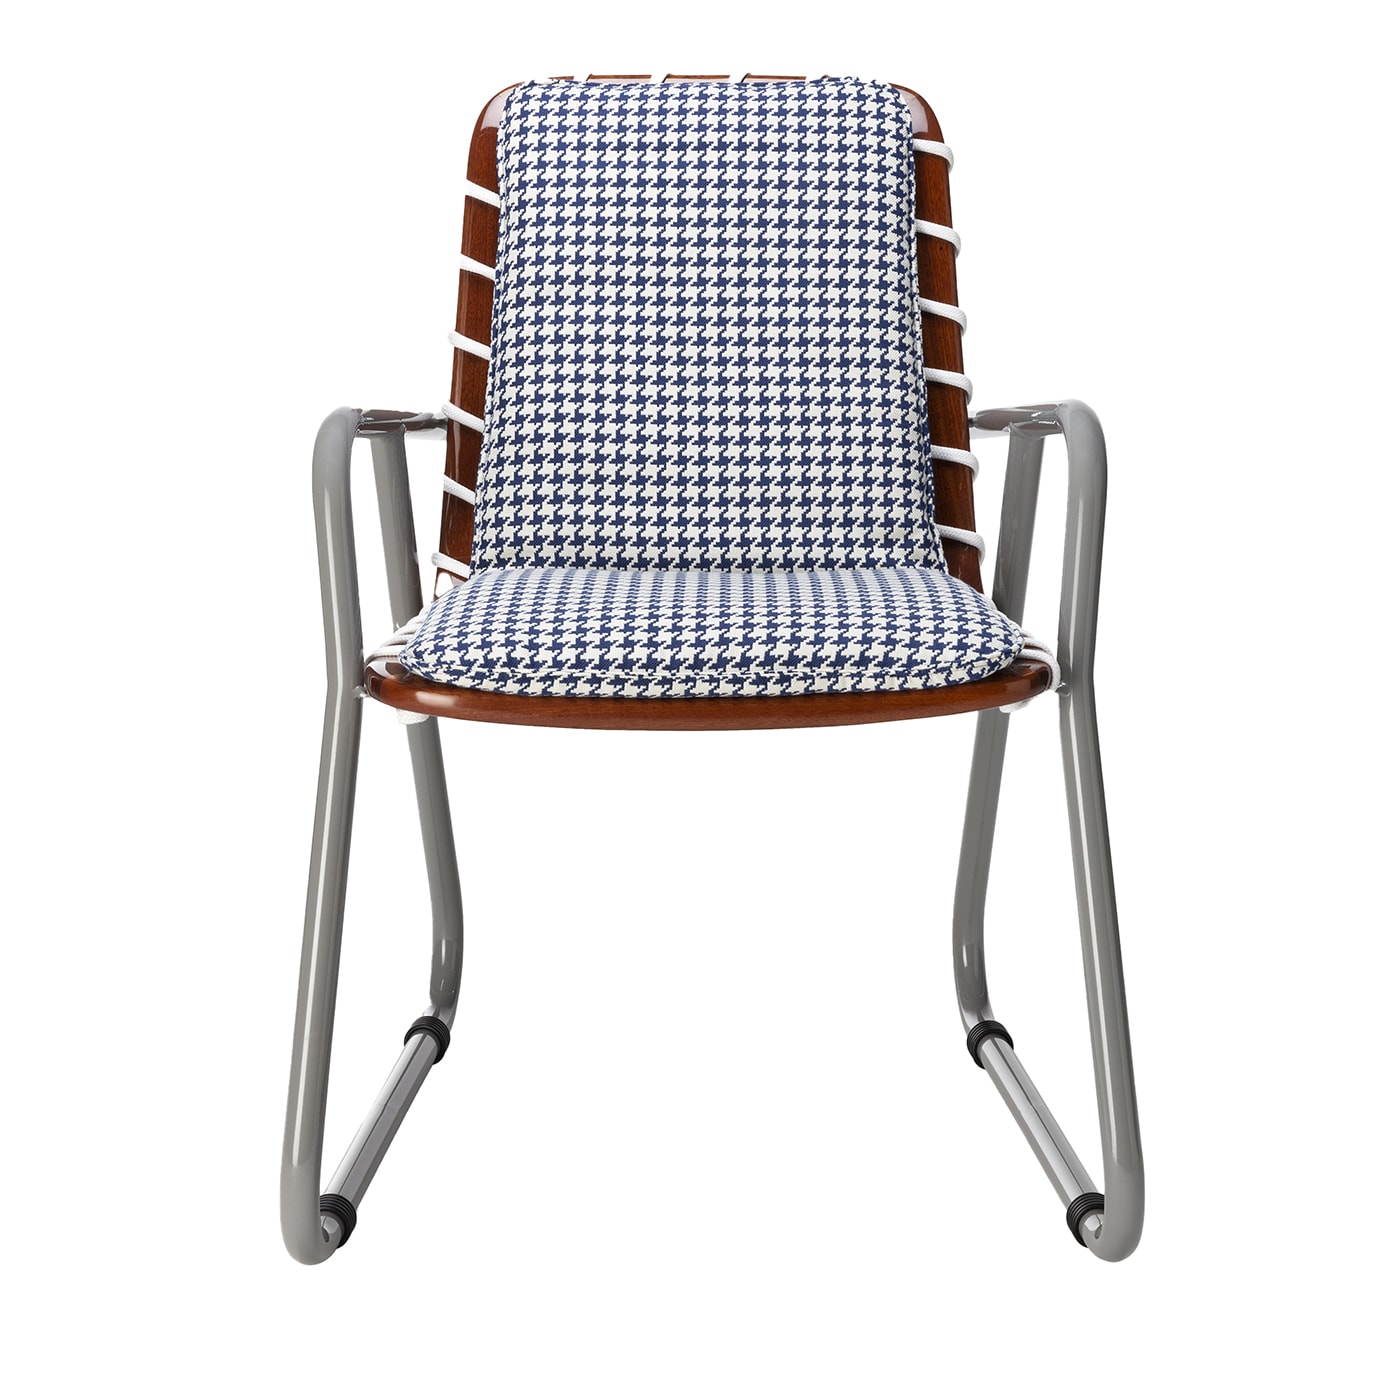 Sunset Dining Chair by Paola Navone - Exteta